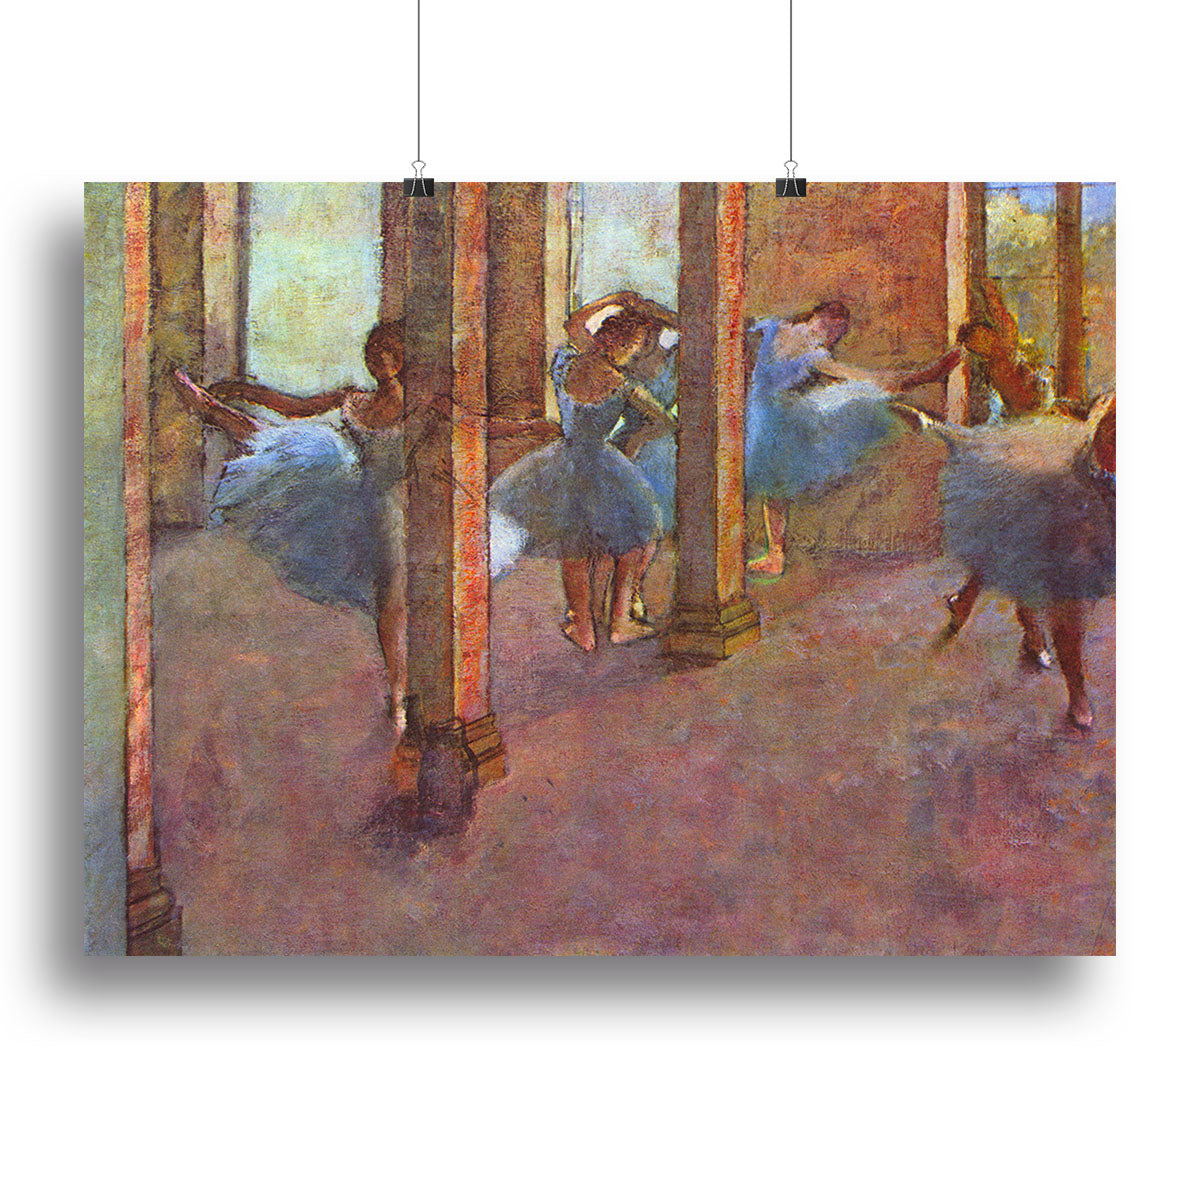 Dancers in the Foyer by Degas Canvas Print or Poster - Canvas Art Rocks - 2